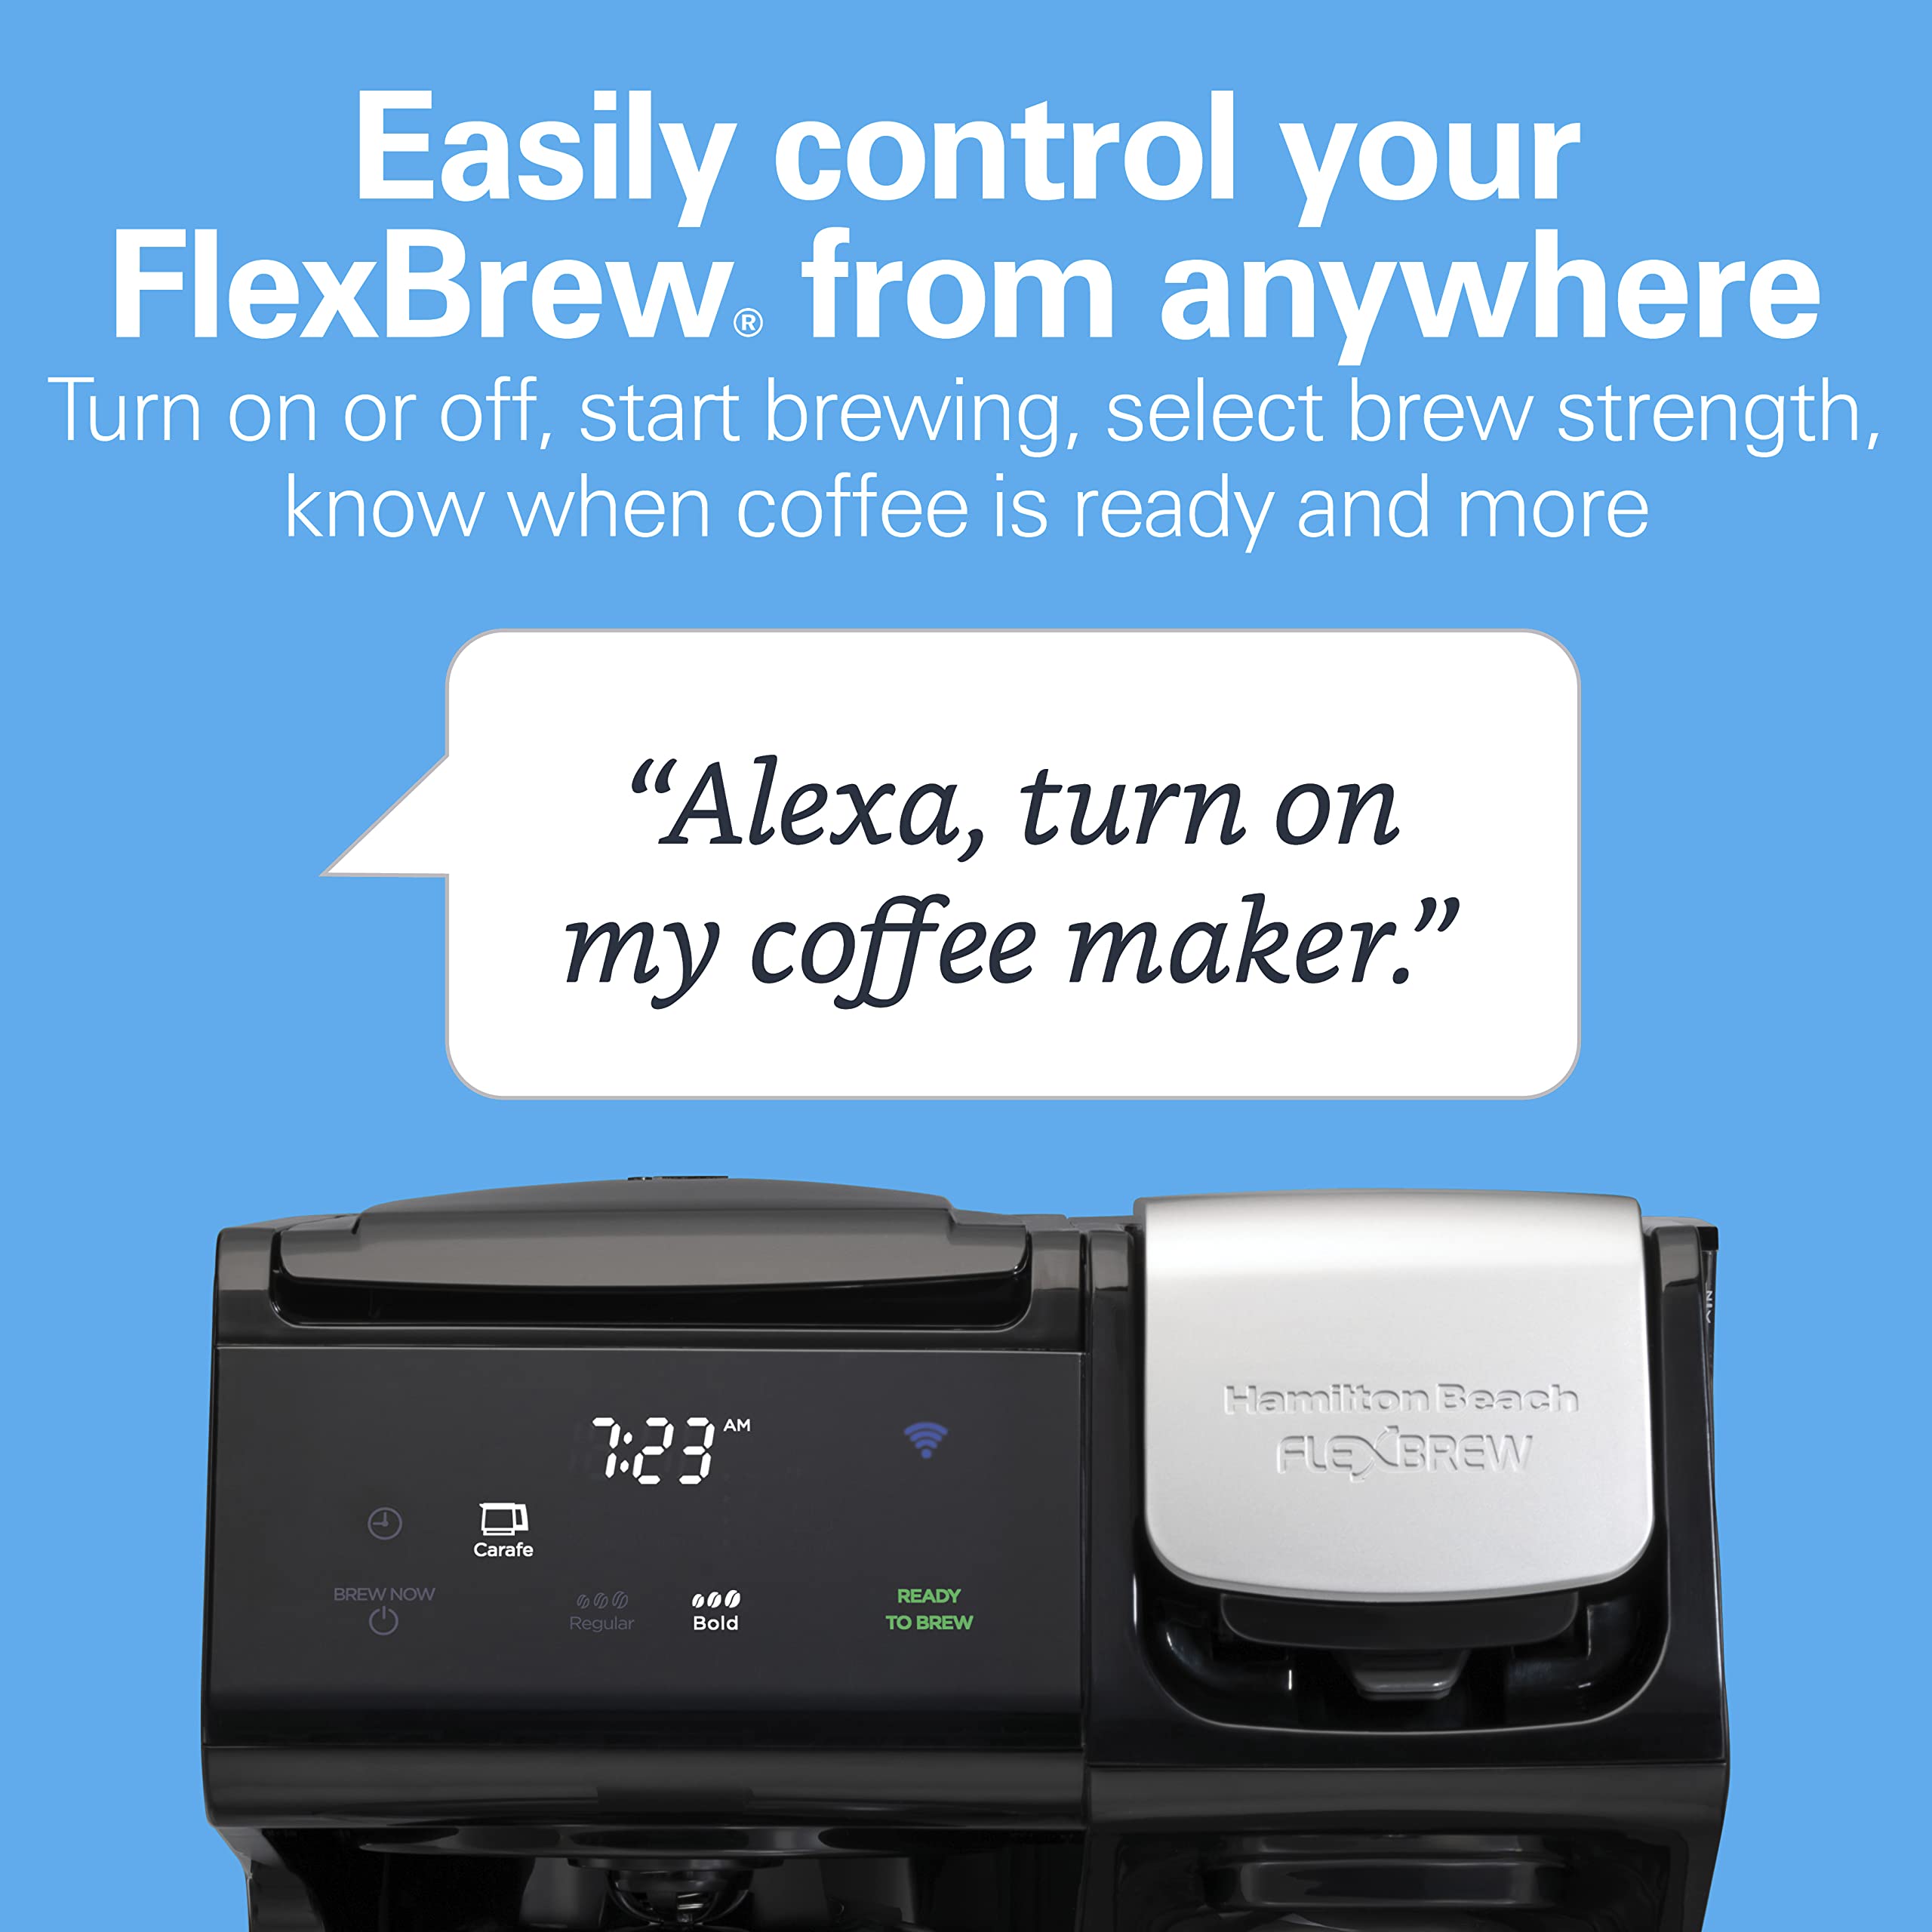 Hamilton Beach FlexBrew Trio 2-Way Works with Alexa Smart Coffee Maker, Compatible with K-Cup Pods or Grounds, Single Serve or Full 12c Pot, 56 oz. Removable Reservoir, Black (49911)